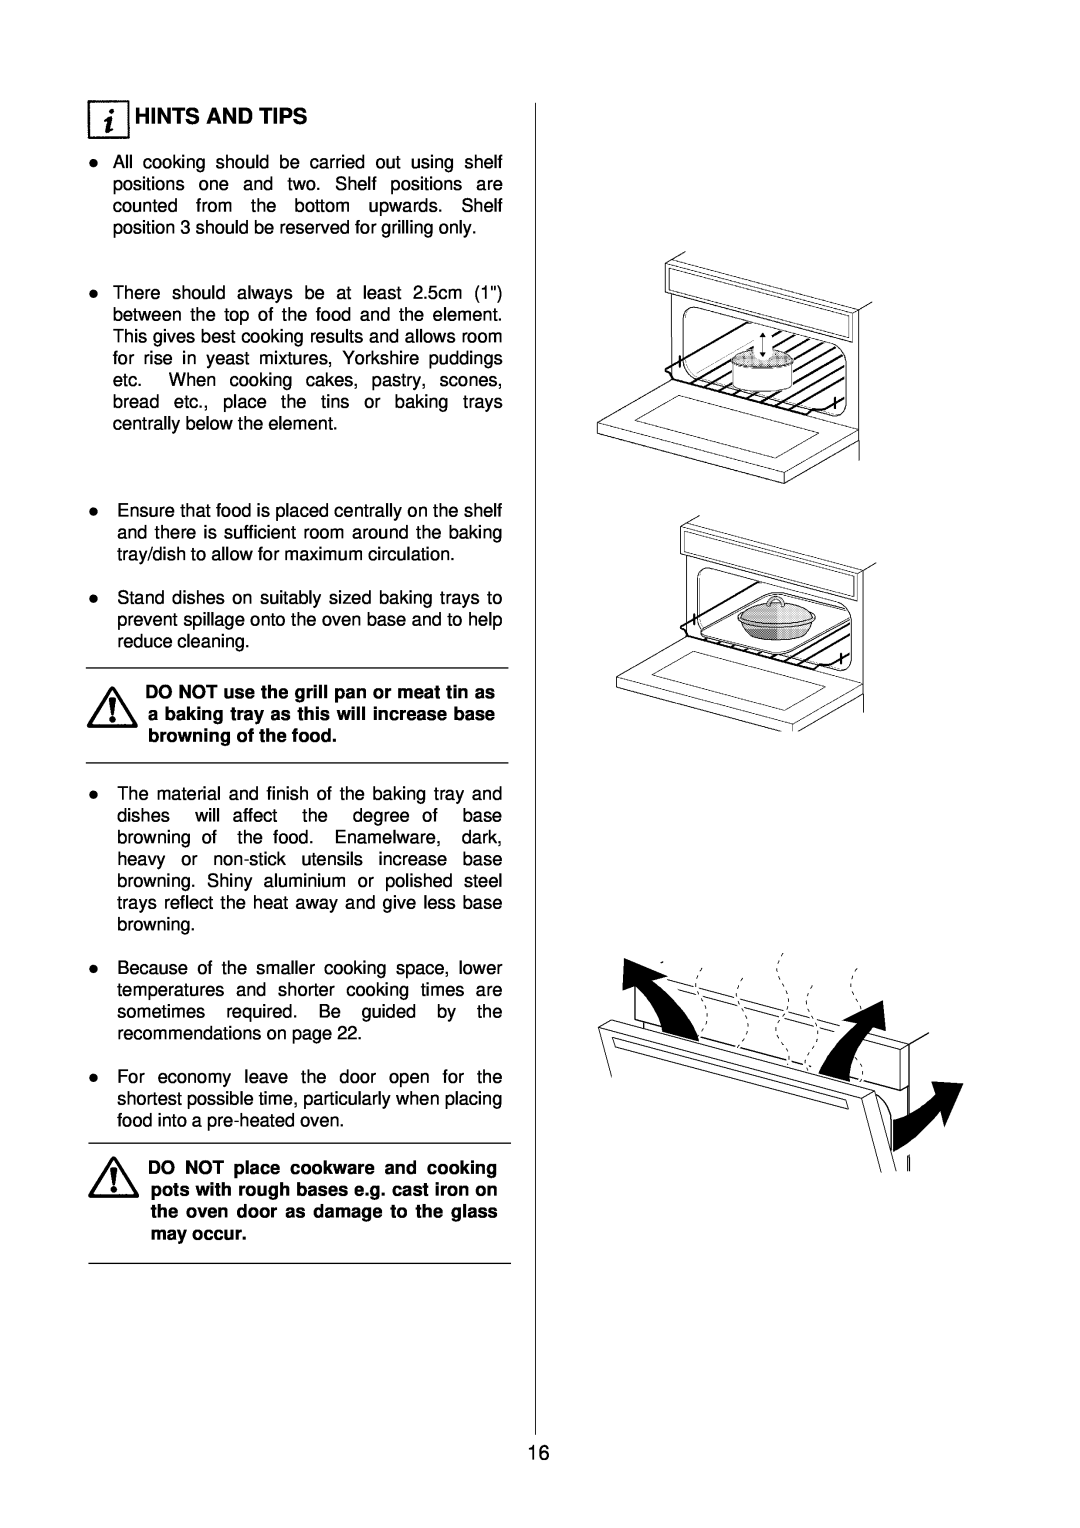 Electrolux D4100-1 operating instructions Hints And Tips, l position 3 should be reserved for grilling only 